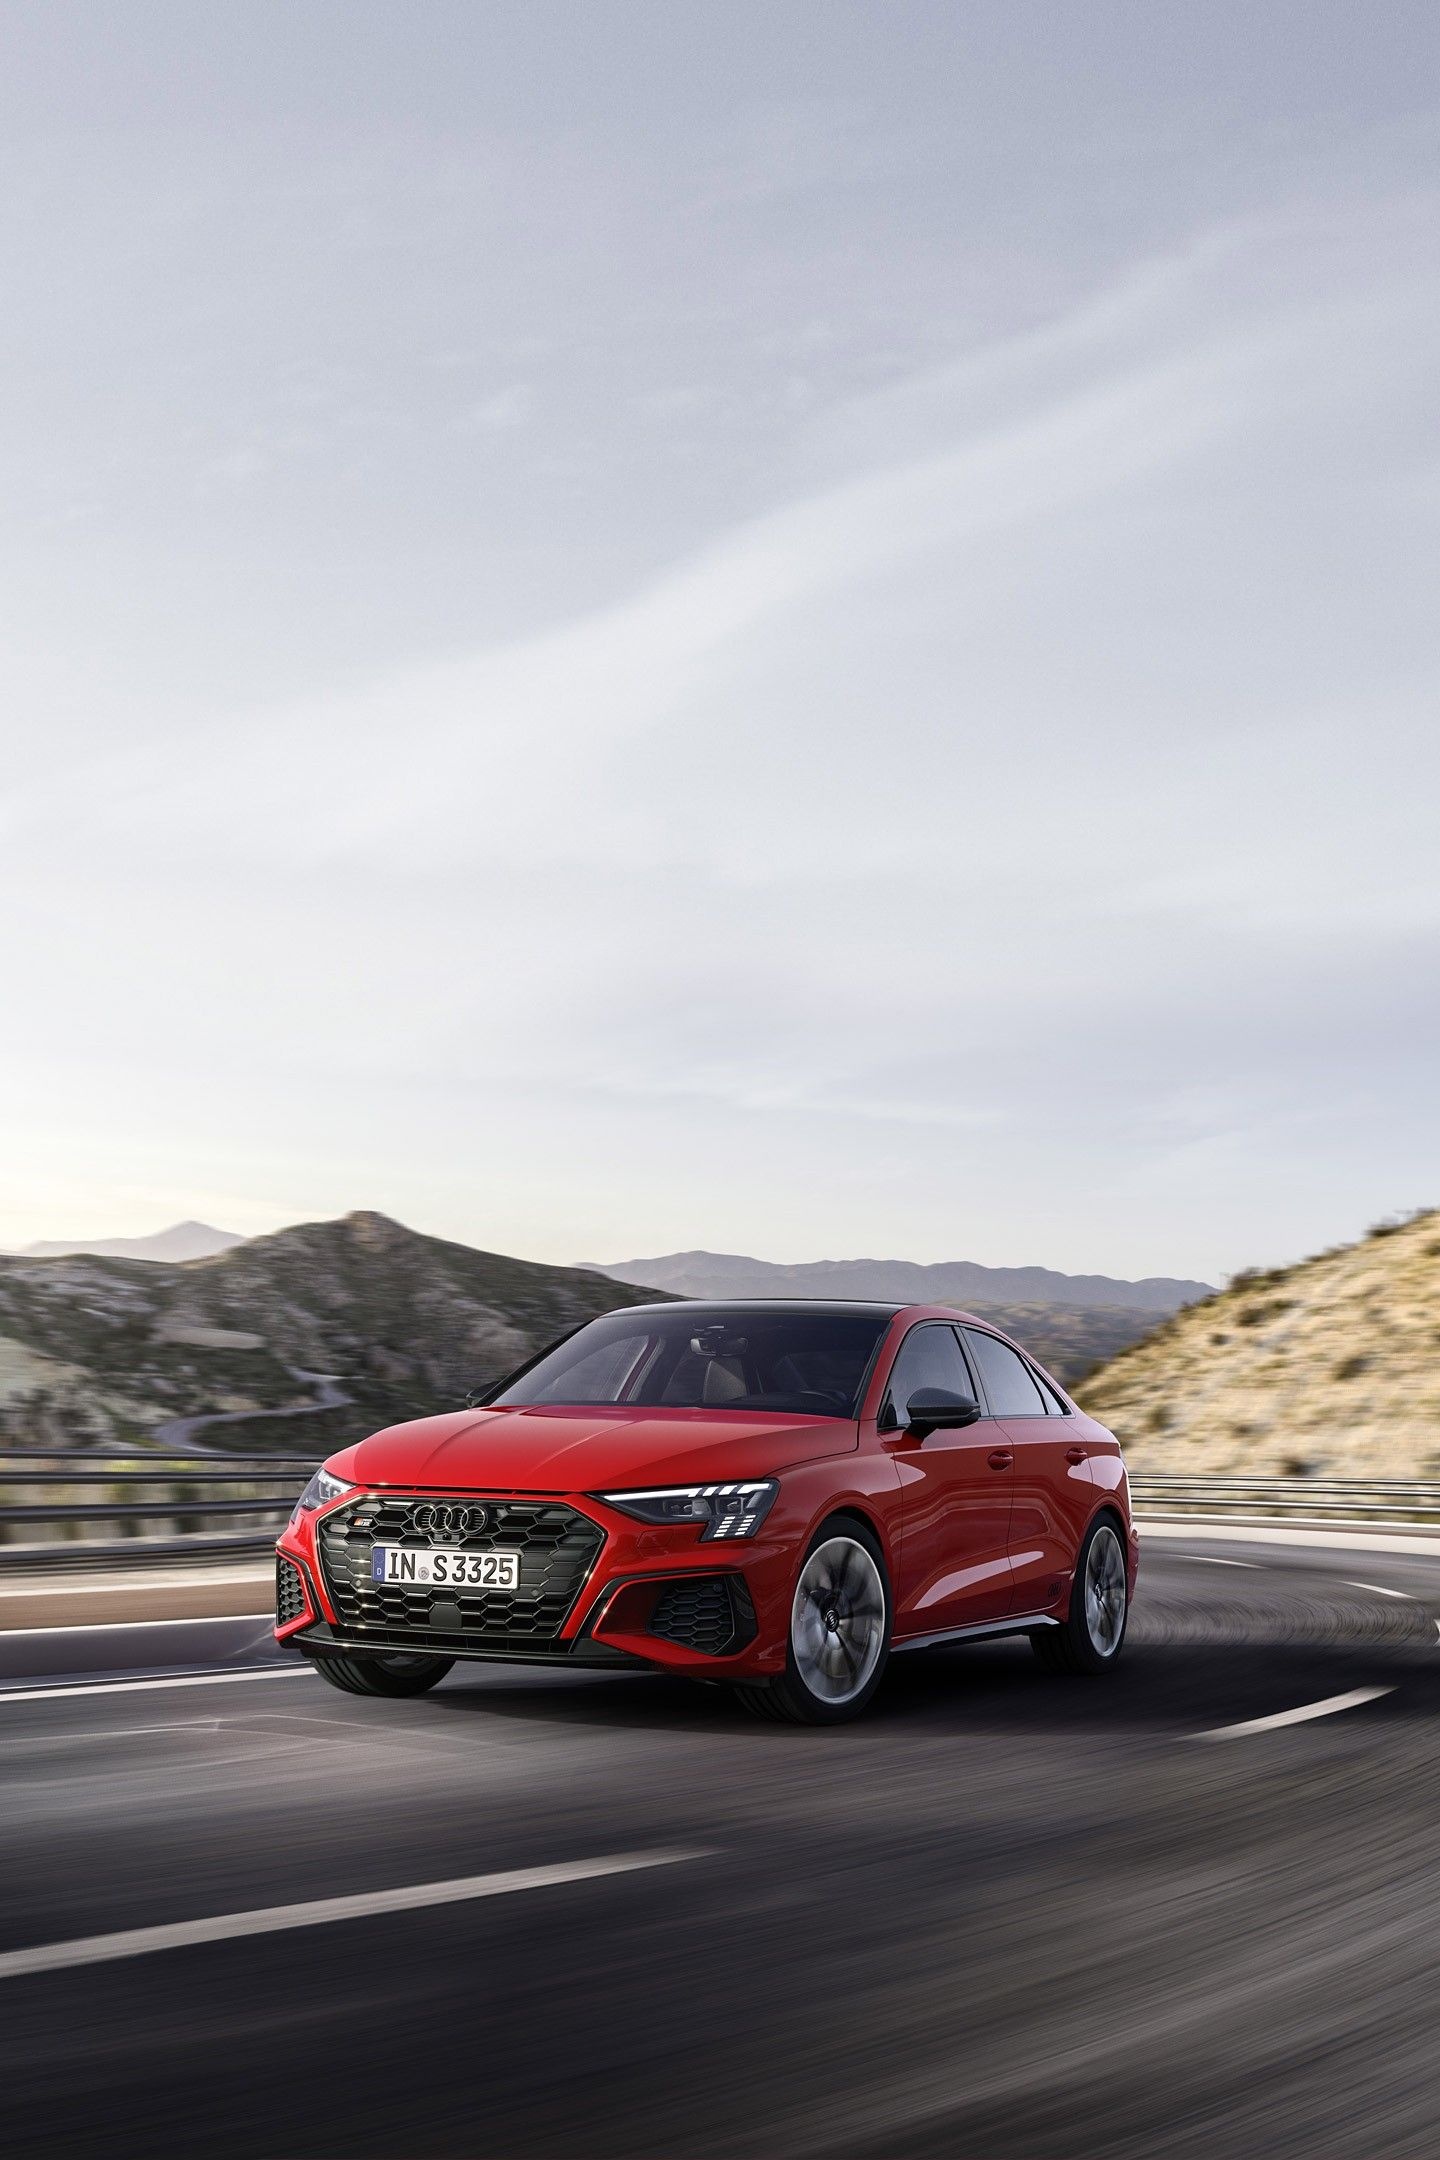 Audi S3, Auto performance, 2022 model, Android wallpaper, 1440x2160 HD Phone